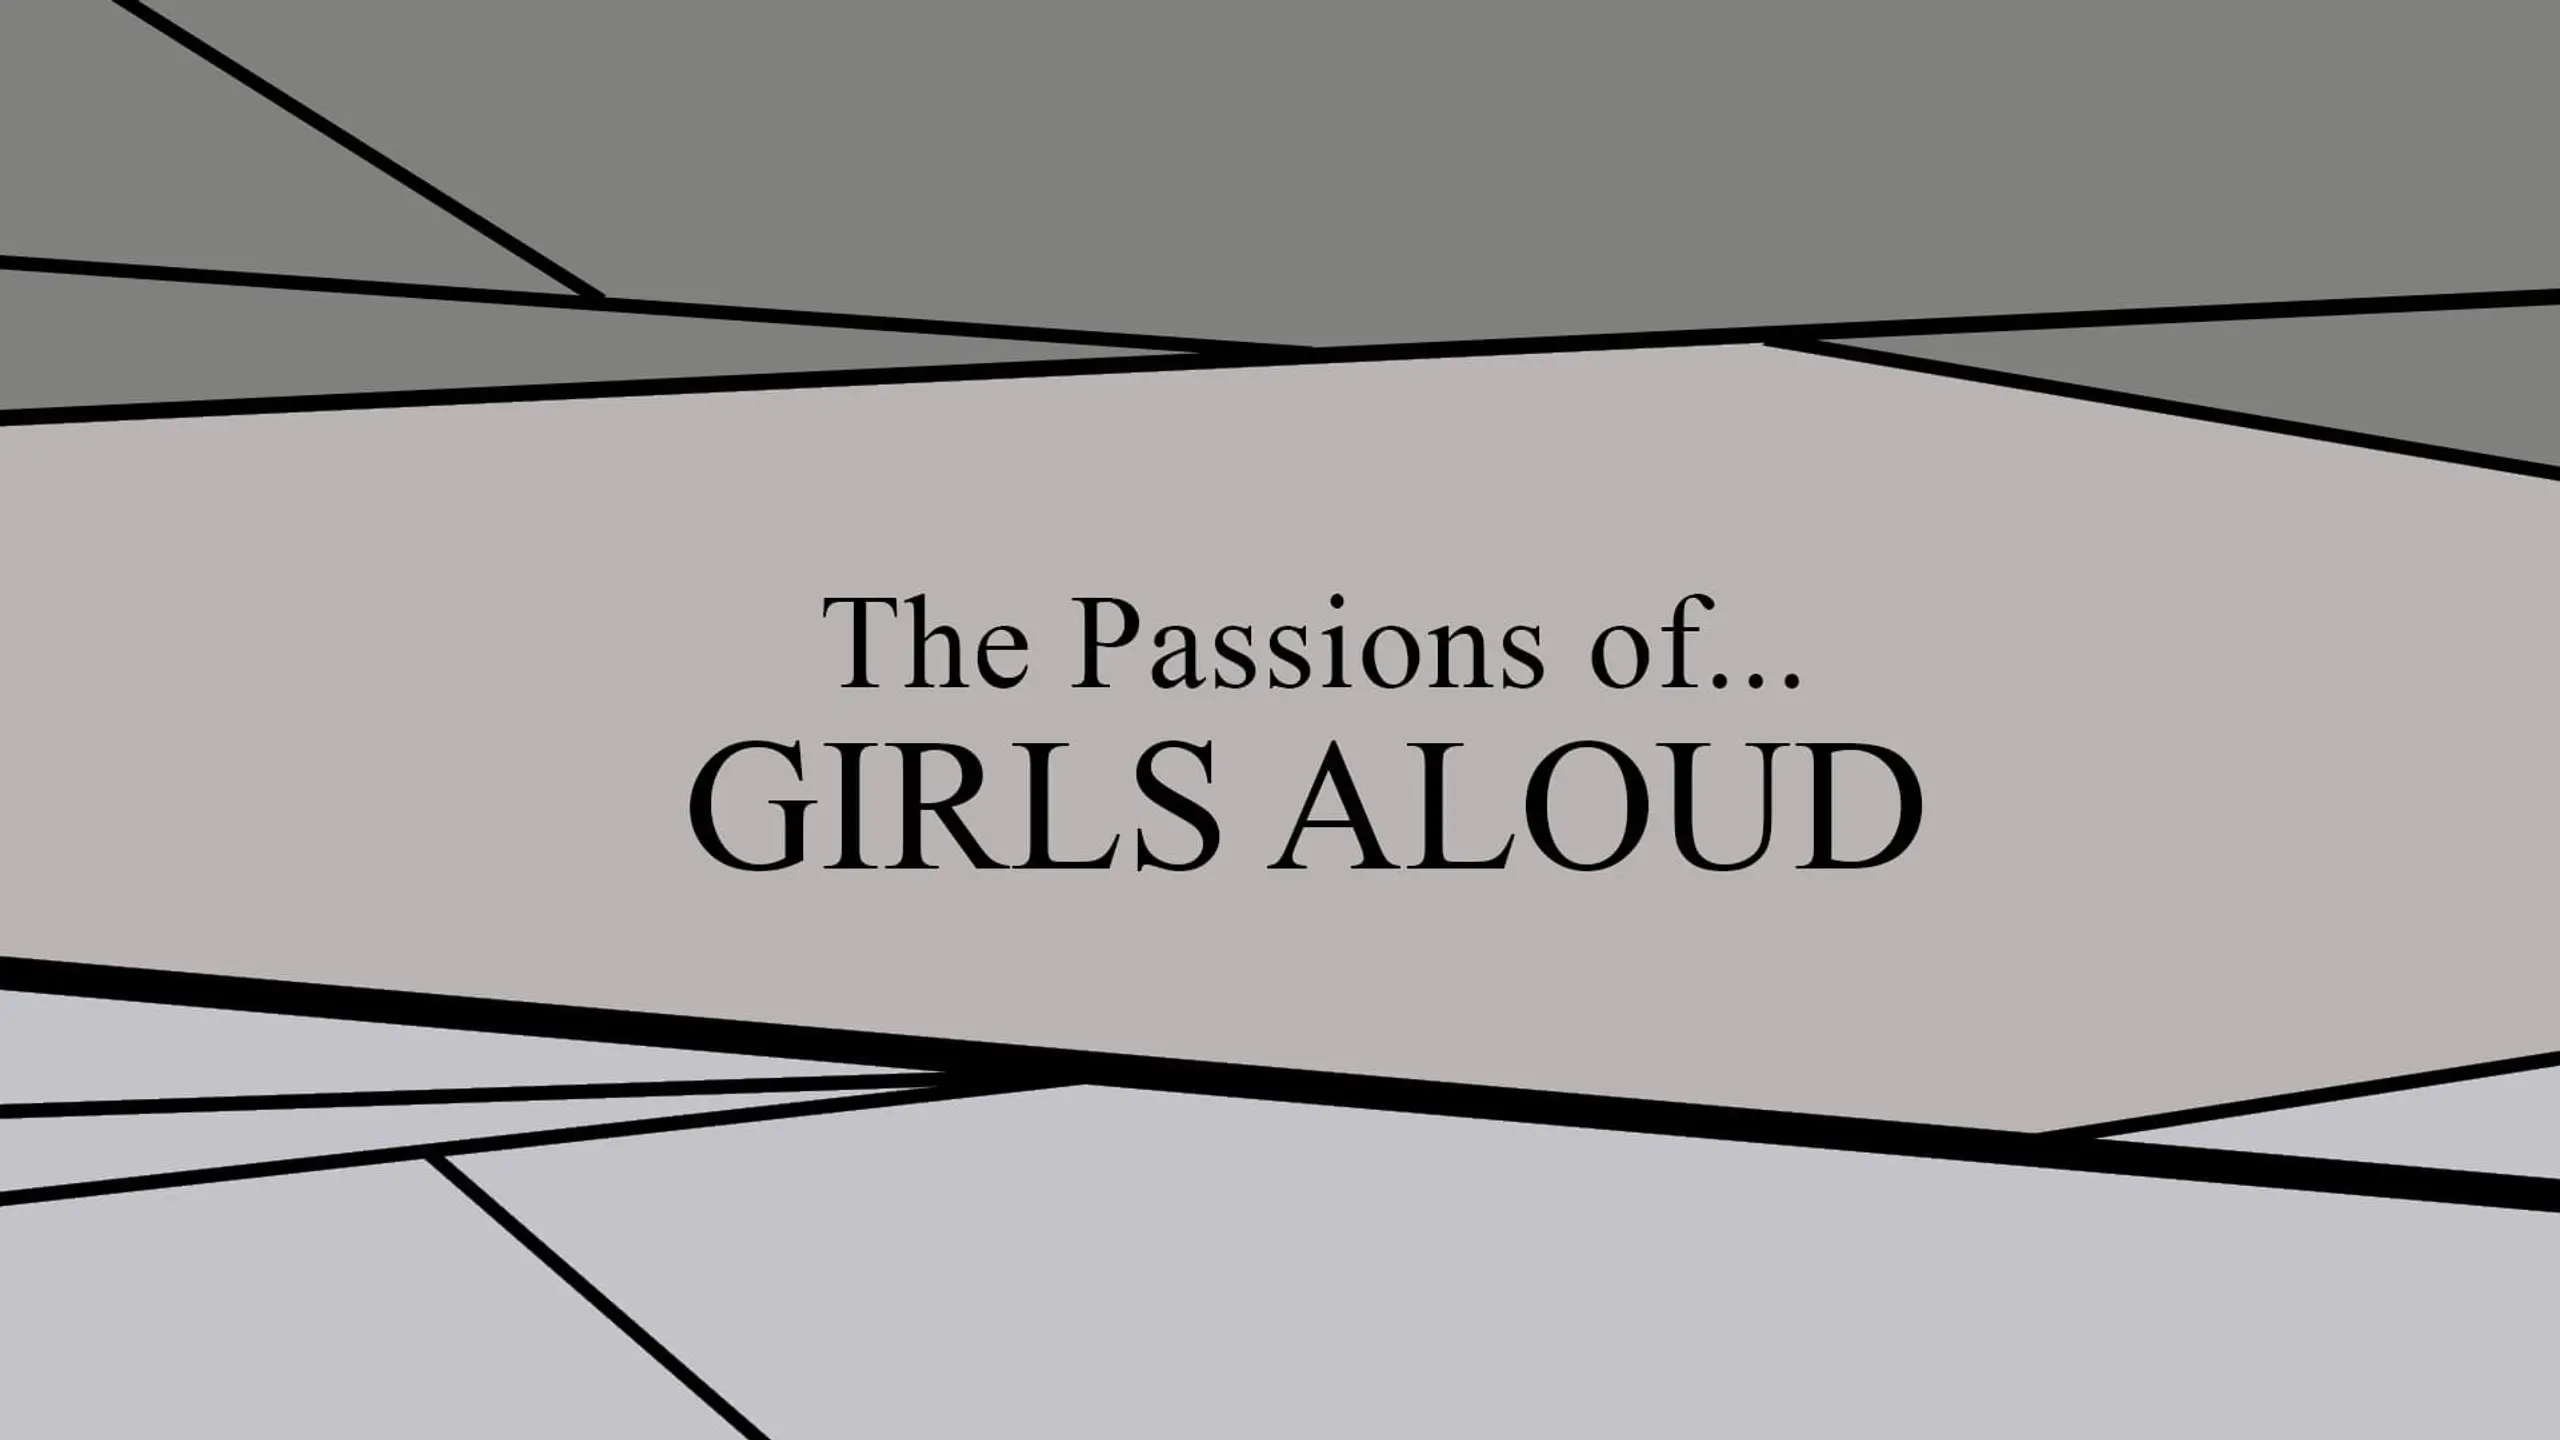 The Passions of Girls Aloud